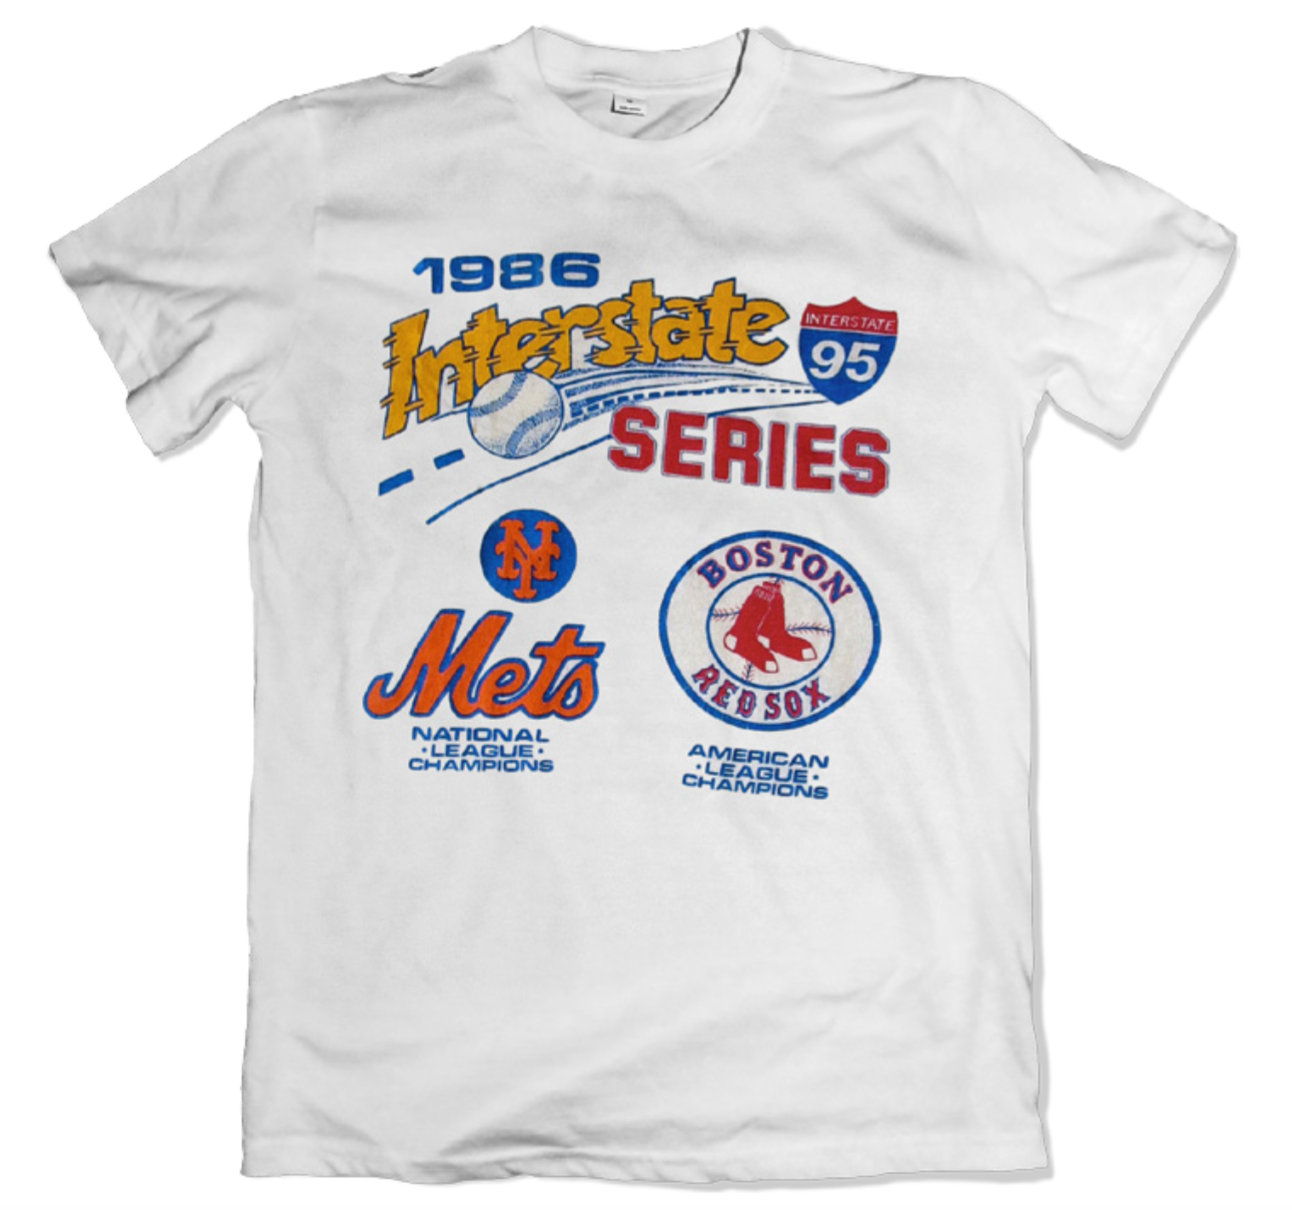 Vintage '86 RED SOX vs METS MLB World Series Touch Of Gold T-Shirt XL – XL3  VINTAGE CLOTHING